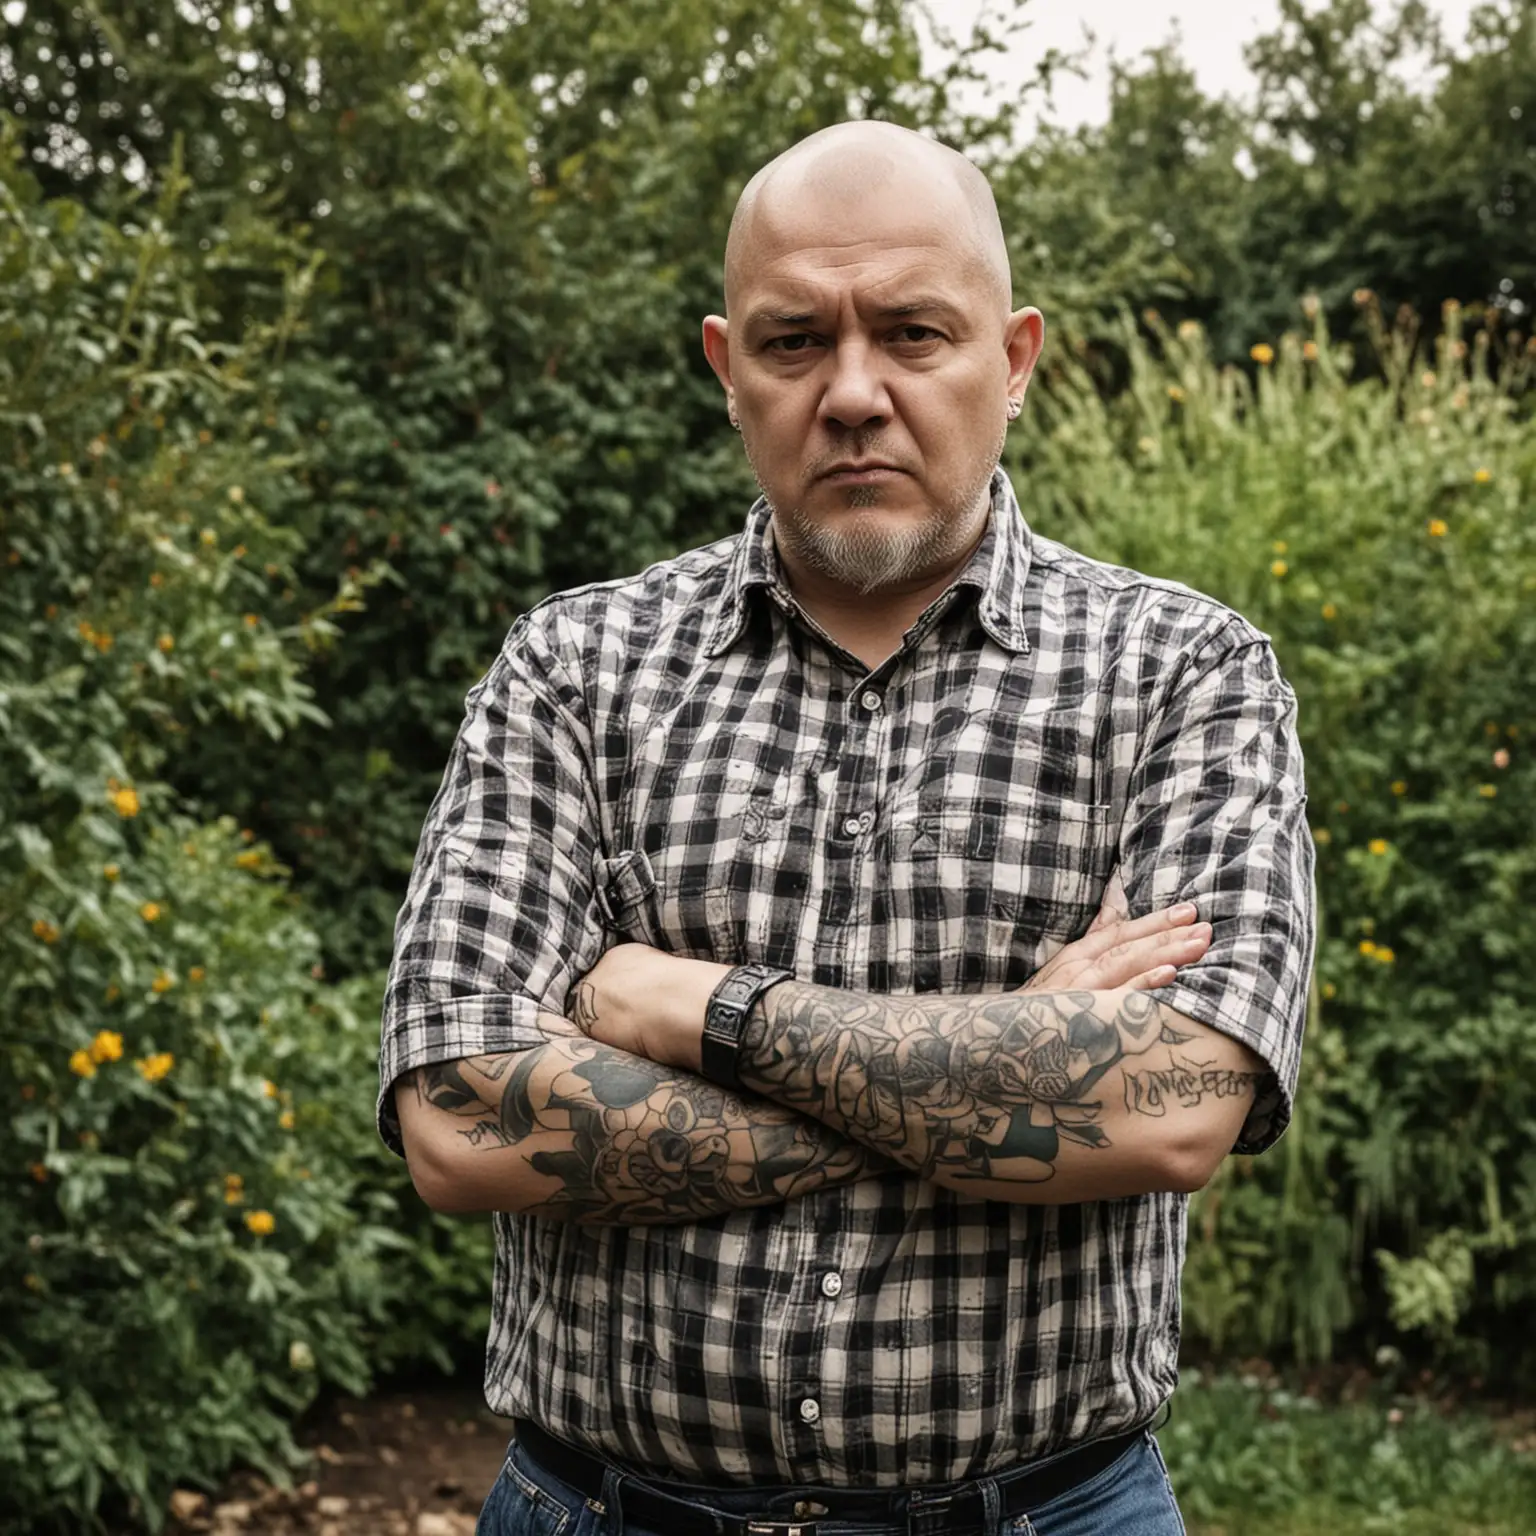 Angry MiddleAged Man with Crossed Arms in Garden